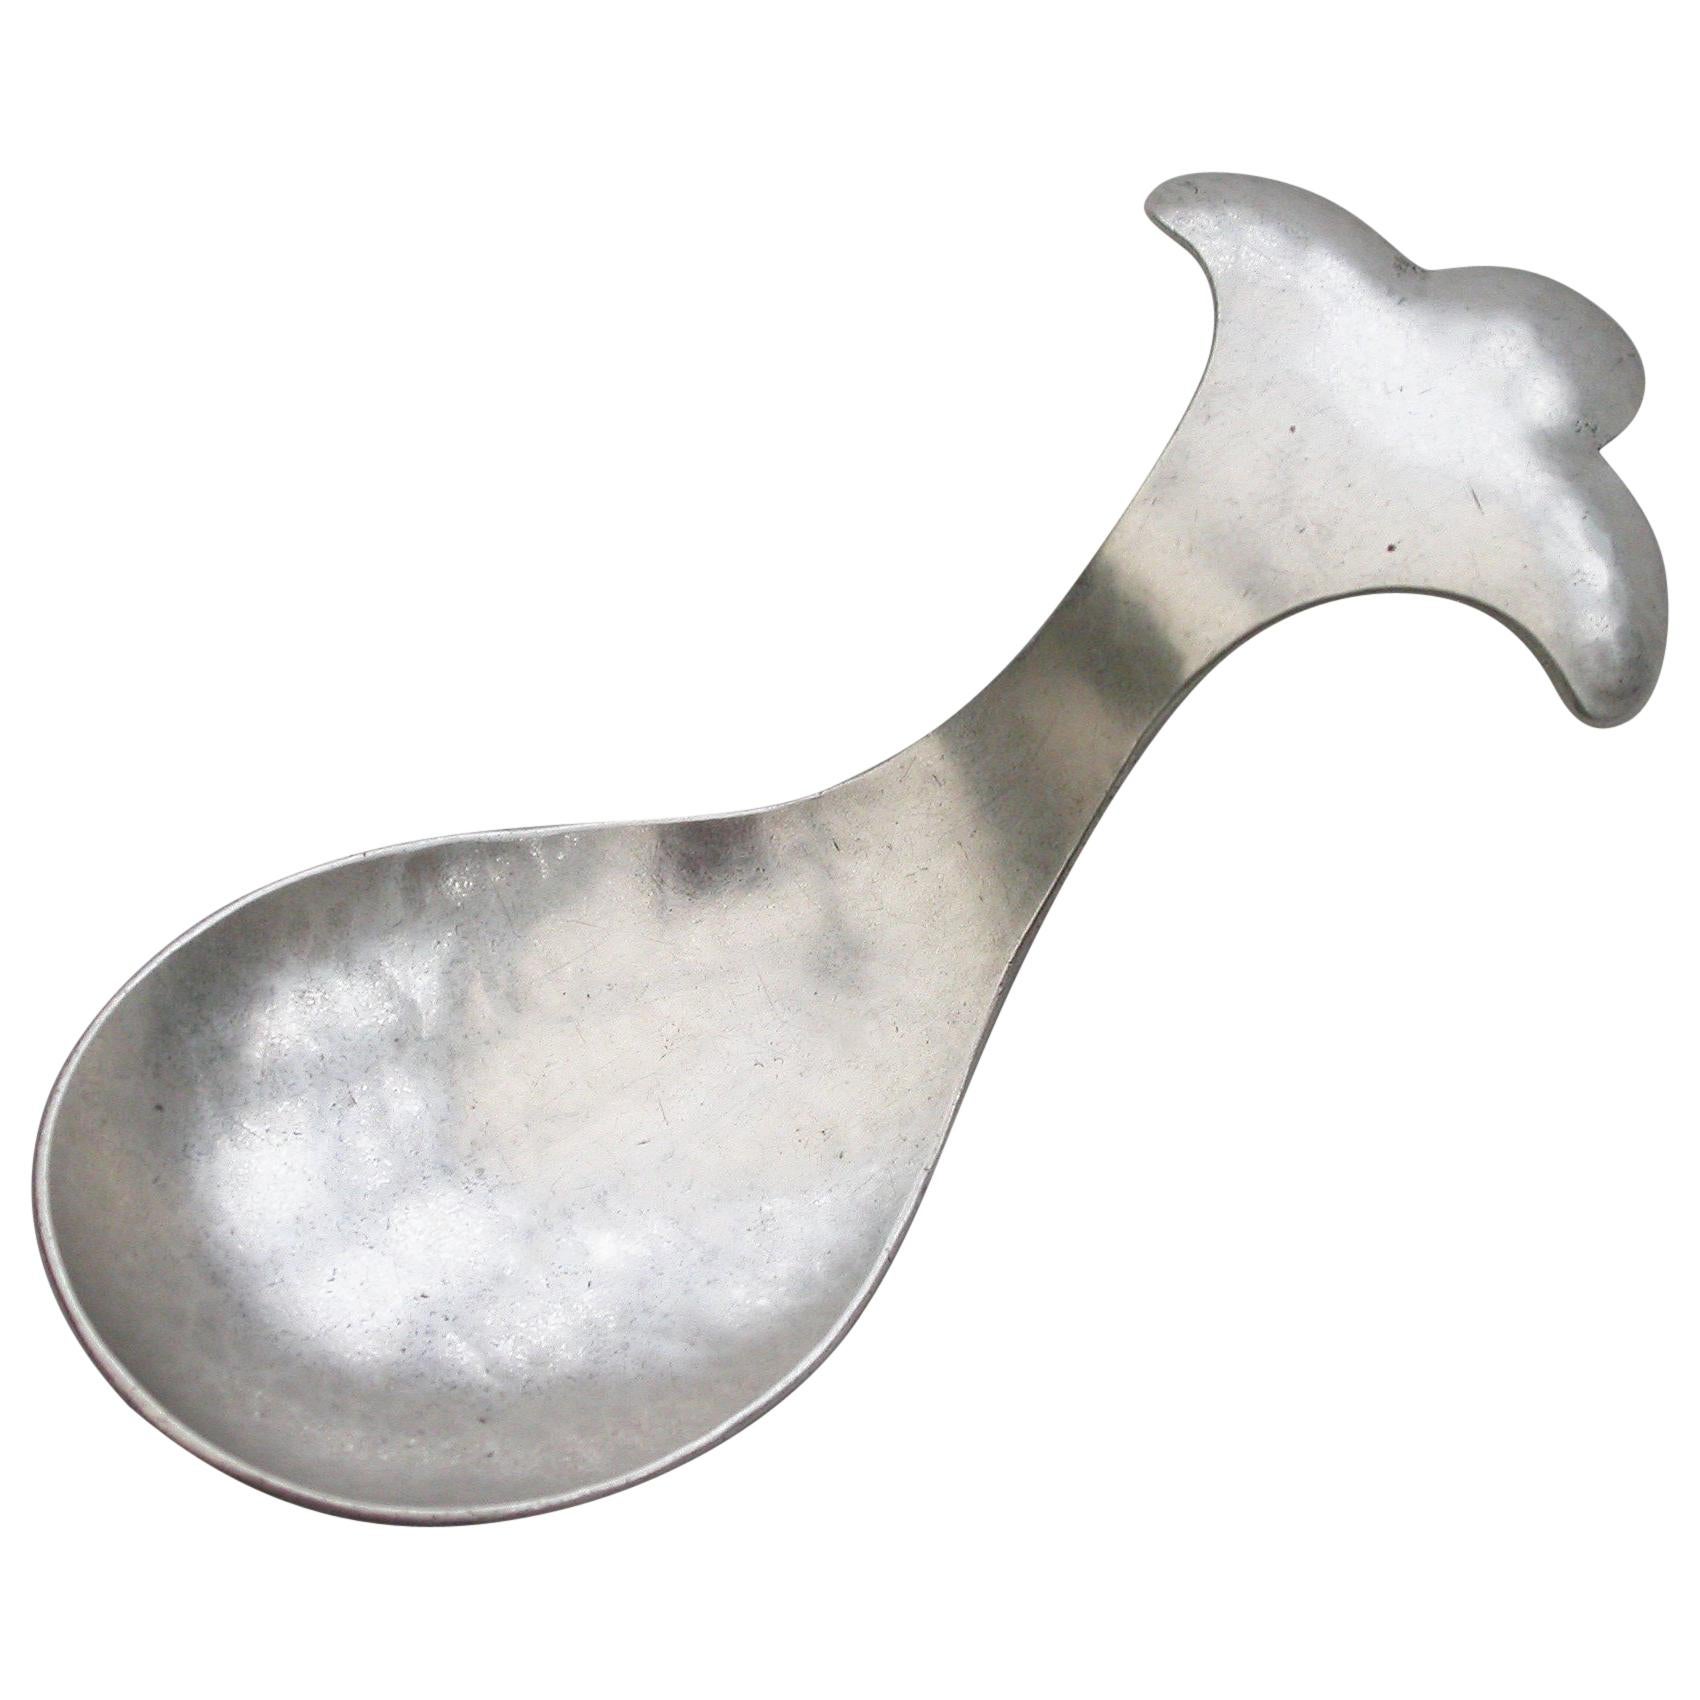 Arts & Crafts Hammered Silver Trefoil Caddy Spoon by W T Pavitt, London, 1929 For Sale